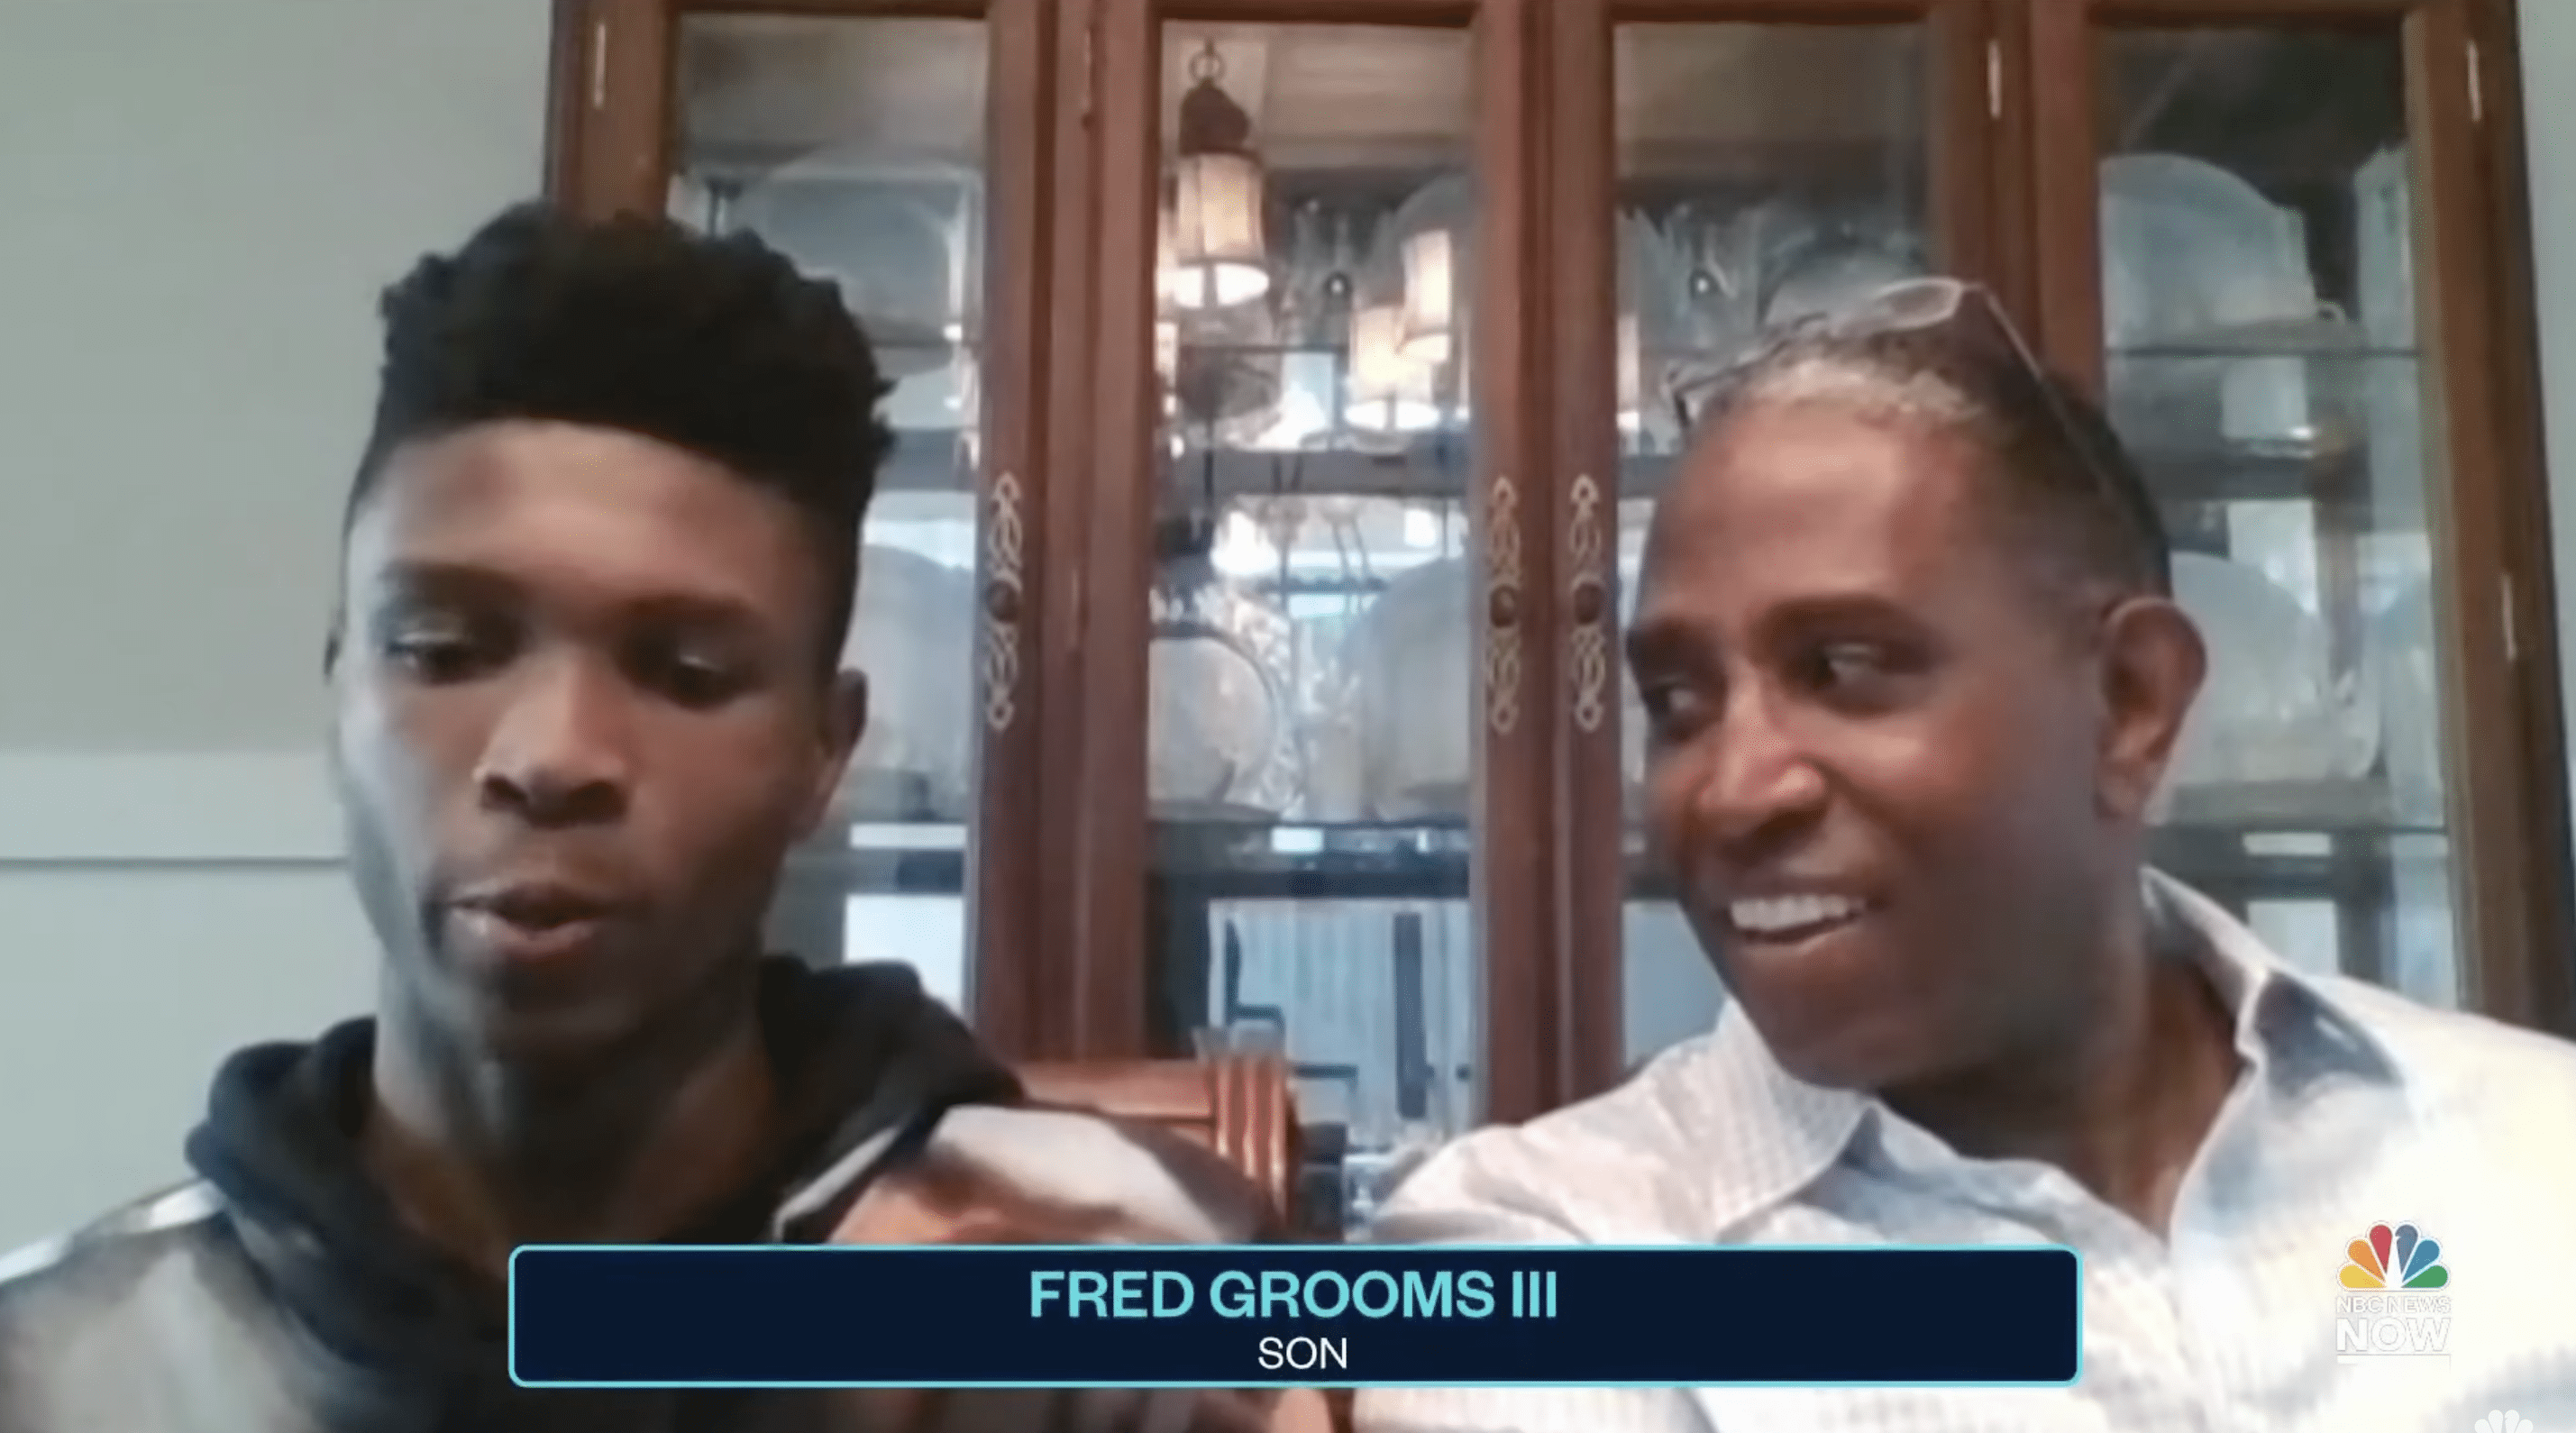 Fred Grooms III pictured with his father, Major Grooms Jr. | Photo: YouTube.com/NBC News